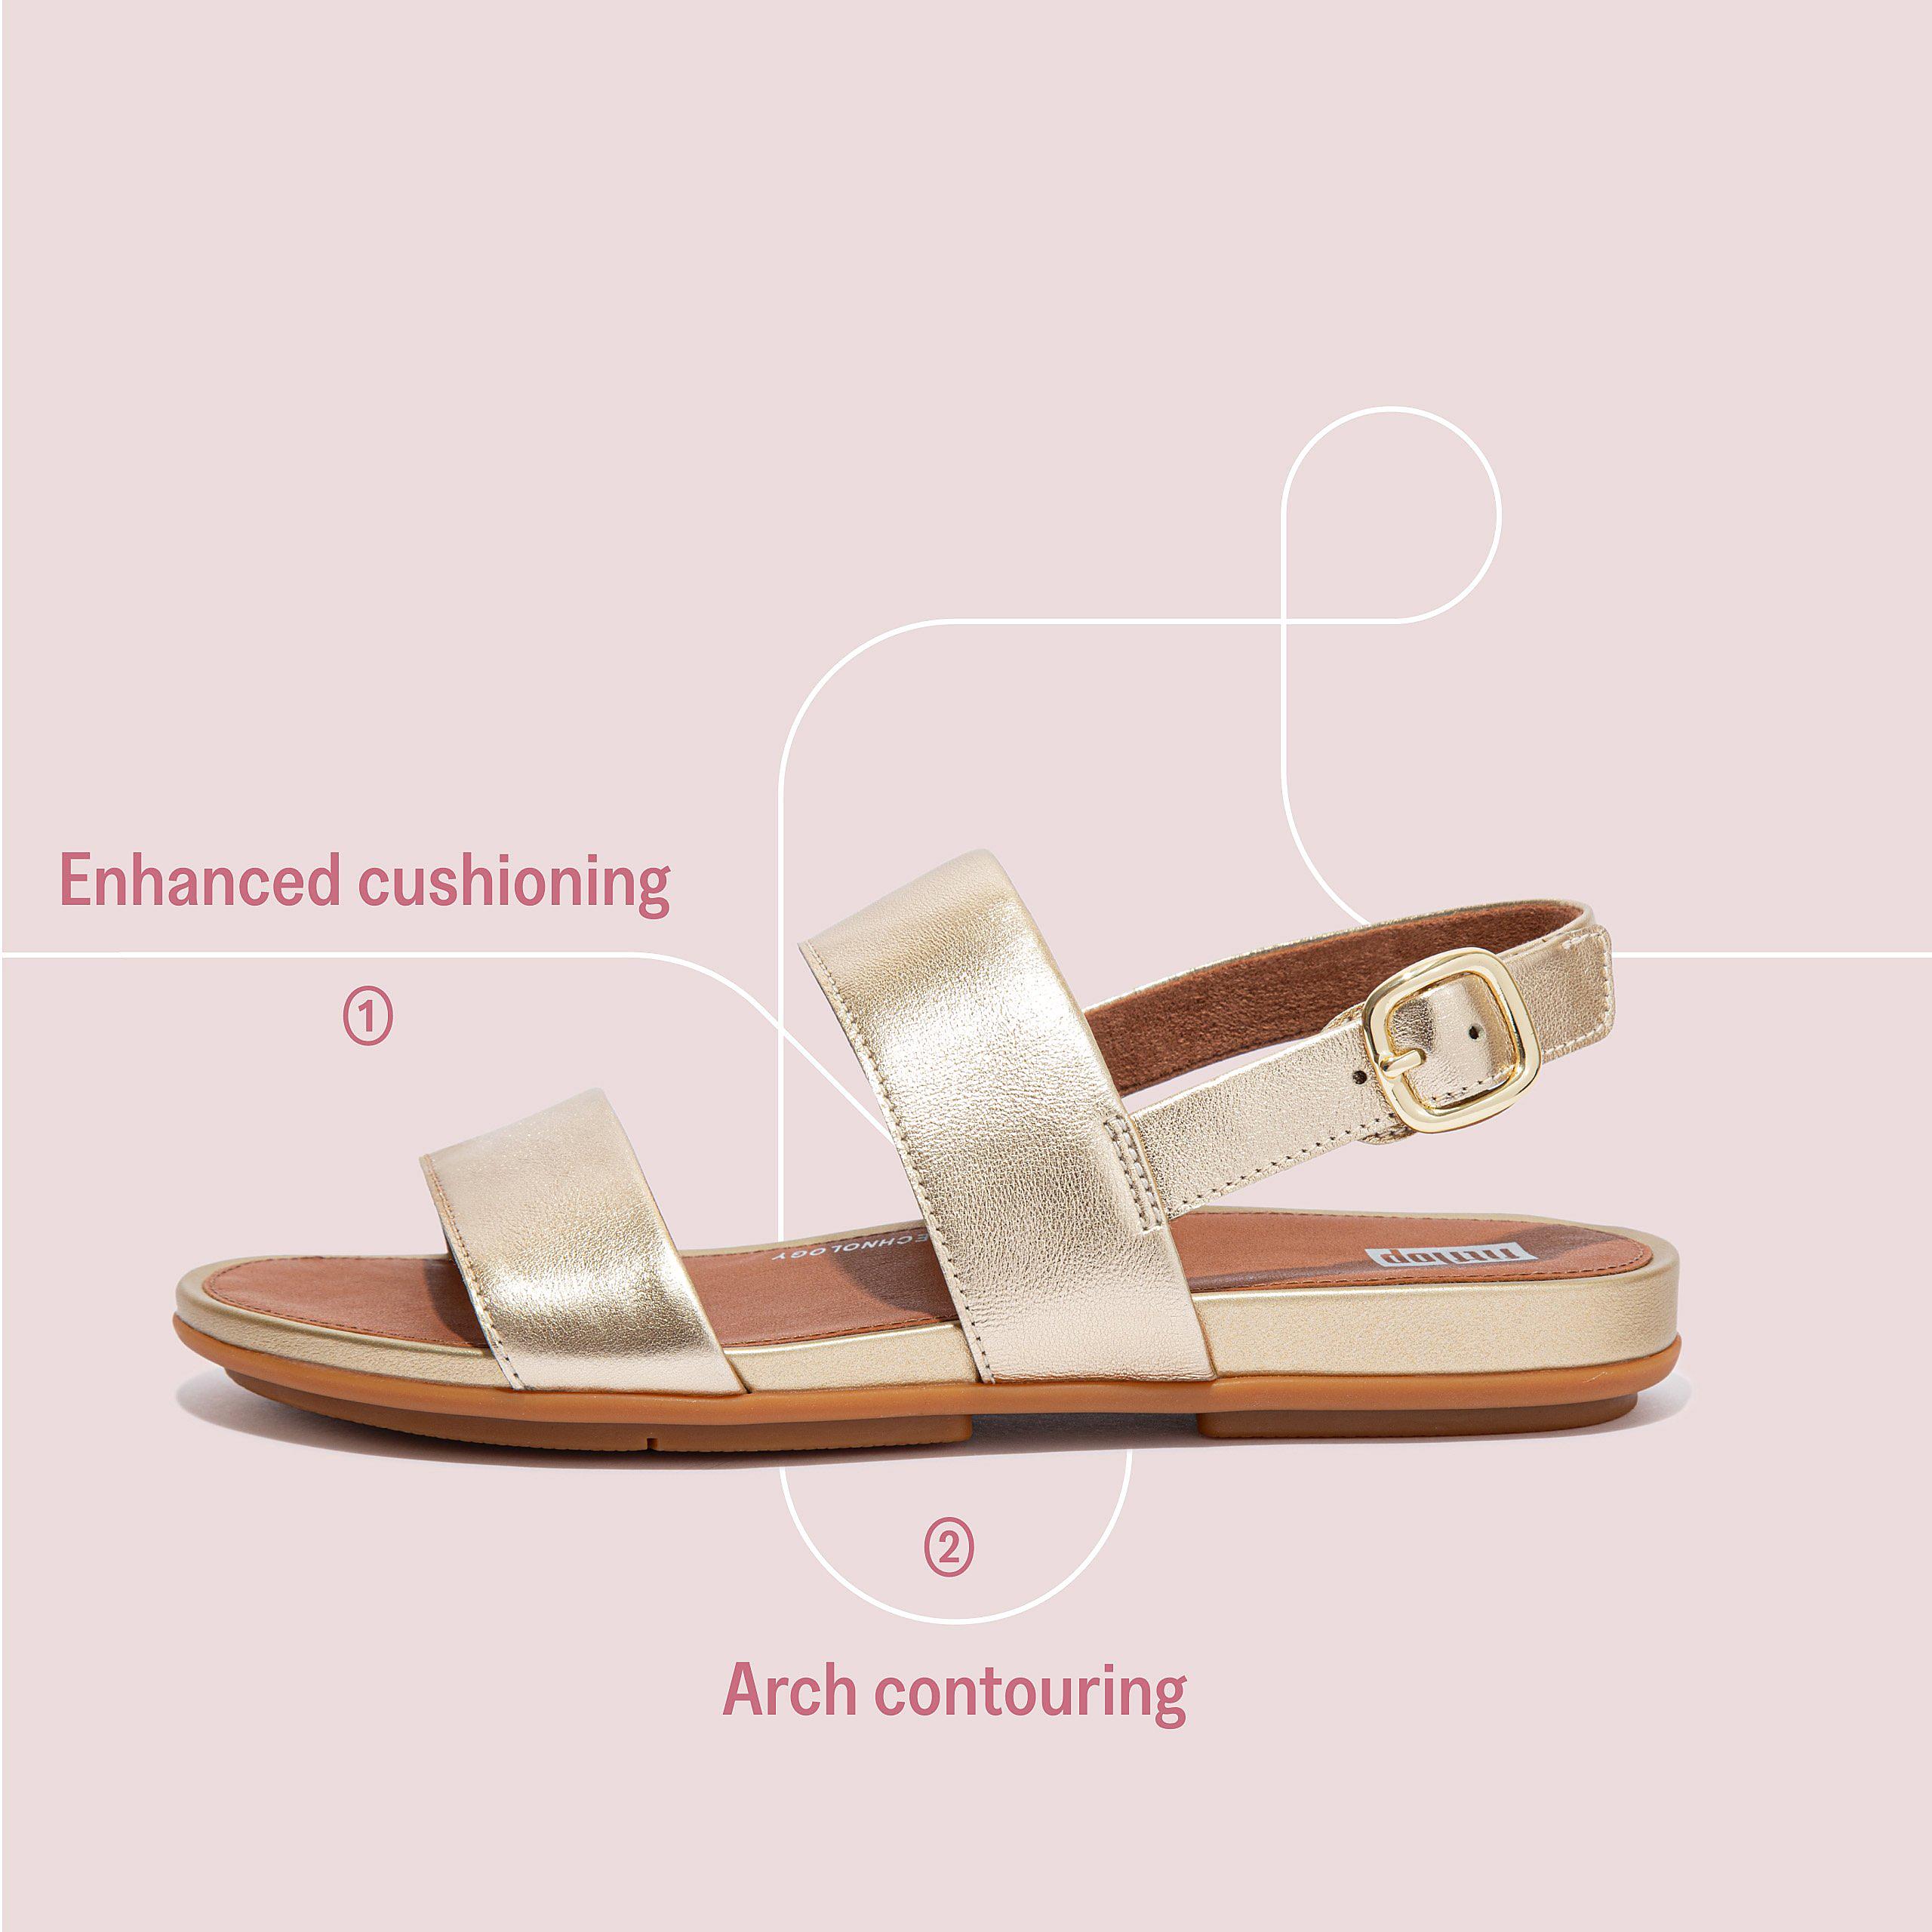 Gracie metalics sandal featuring the dynamicush technology